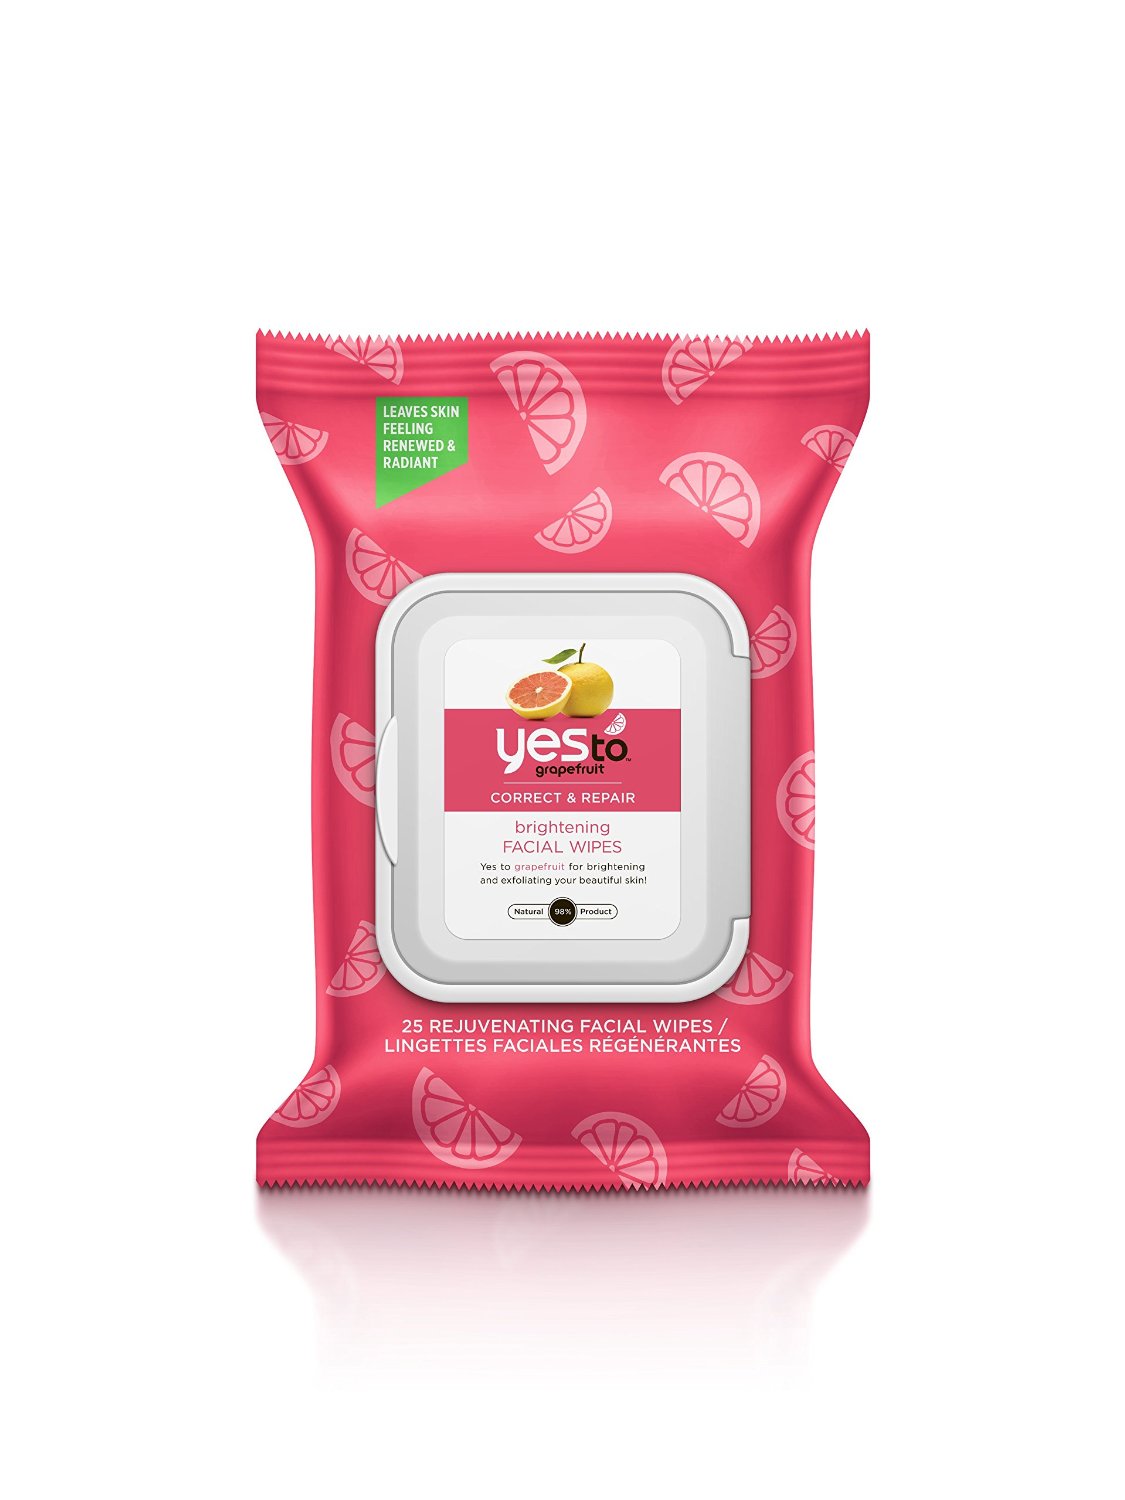 Yes to Grapefruit Rejuvenating Facial Wipes (25 Count) Only $2.75!